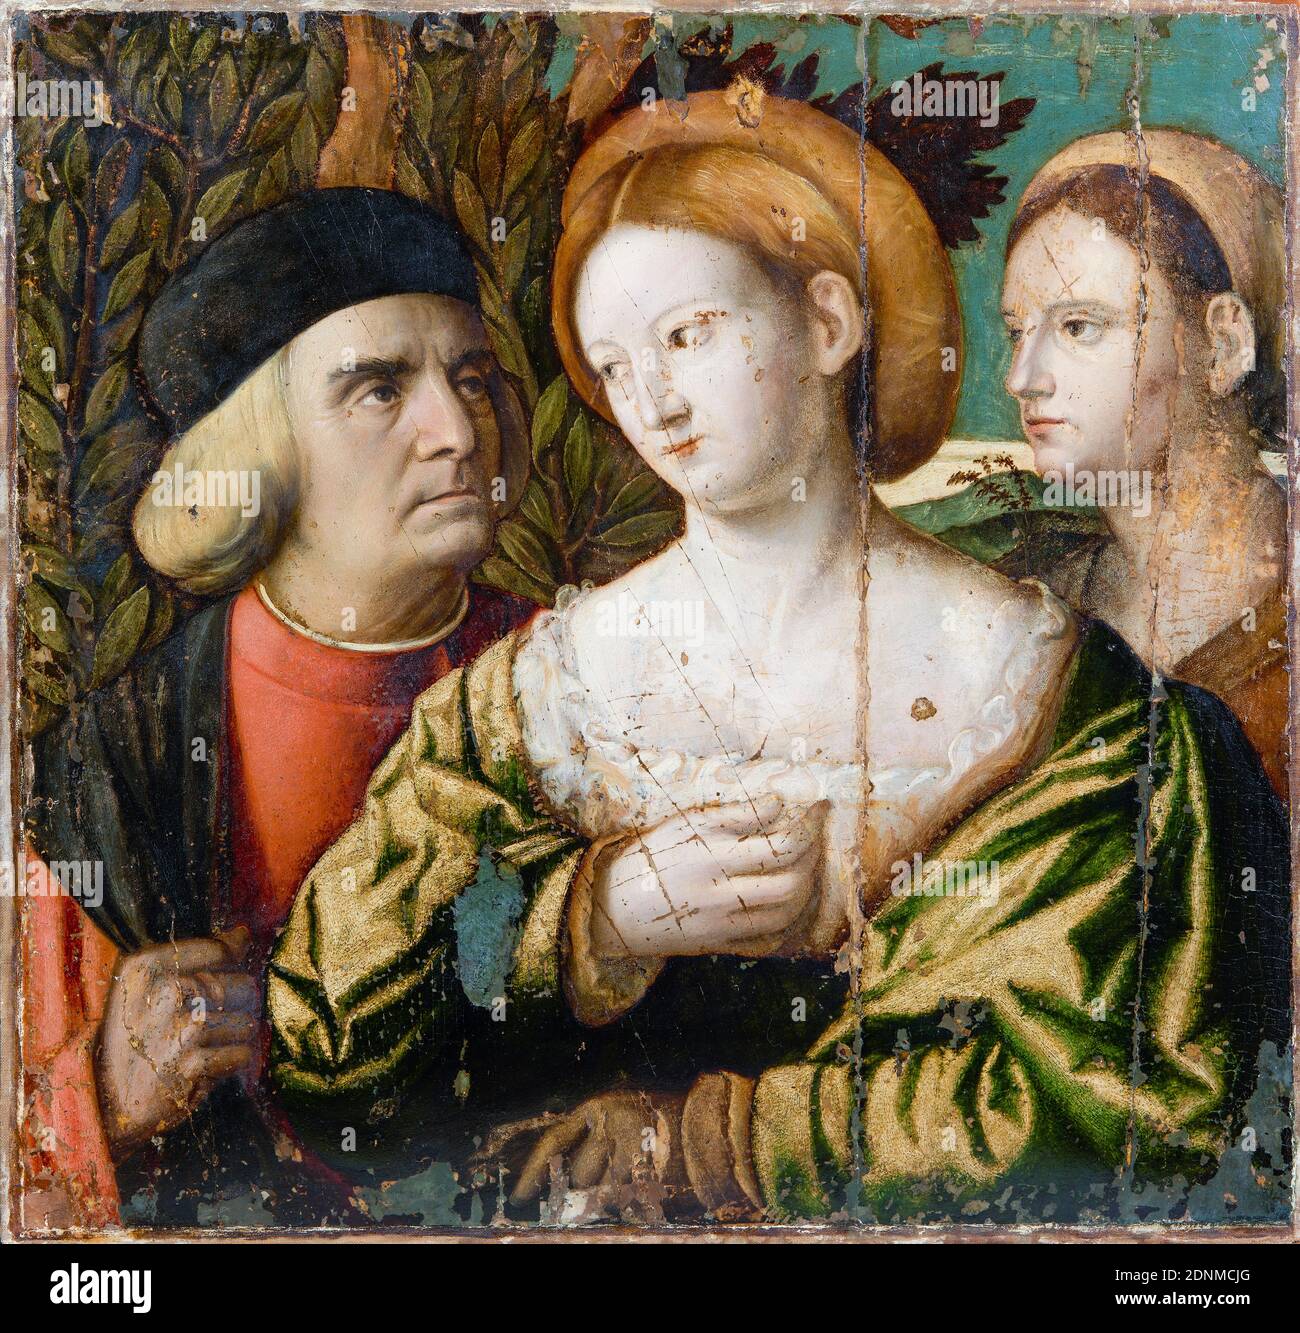 Venetian Nobleman and Two Women, painting by Palma Vecchio, 1520-1530 Stock Photo